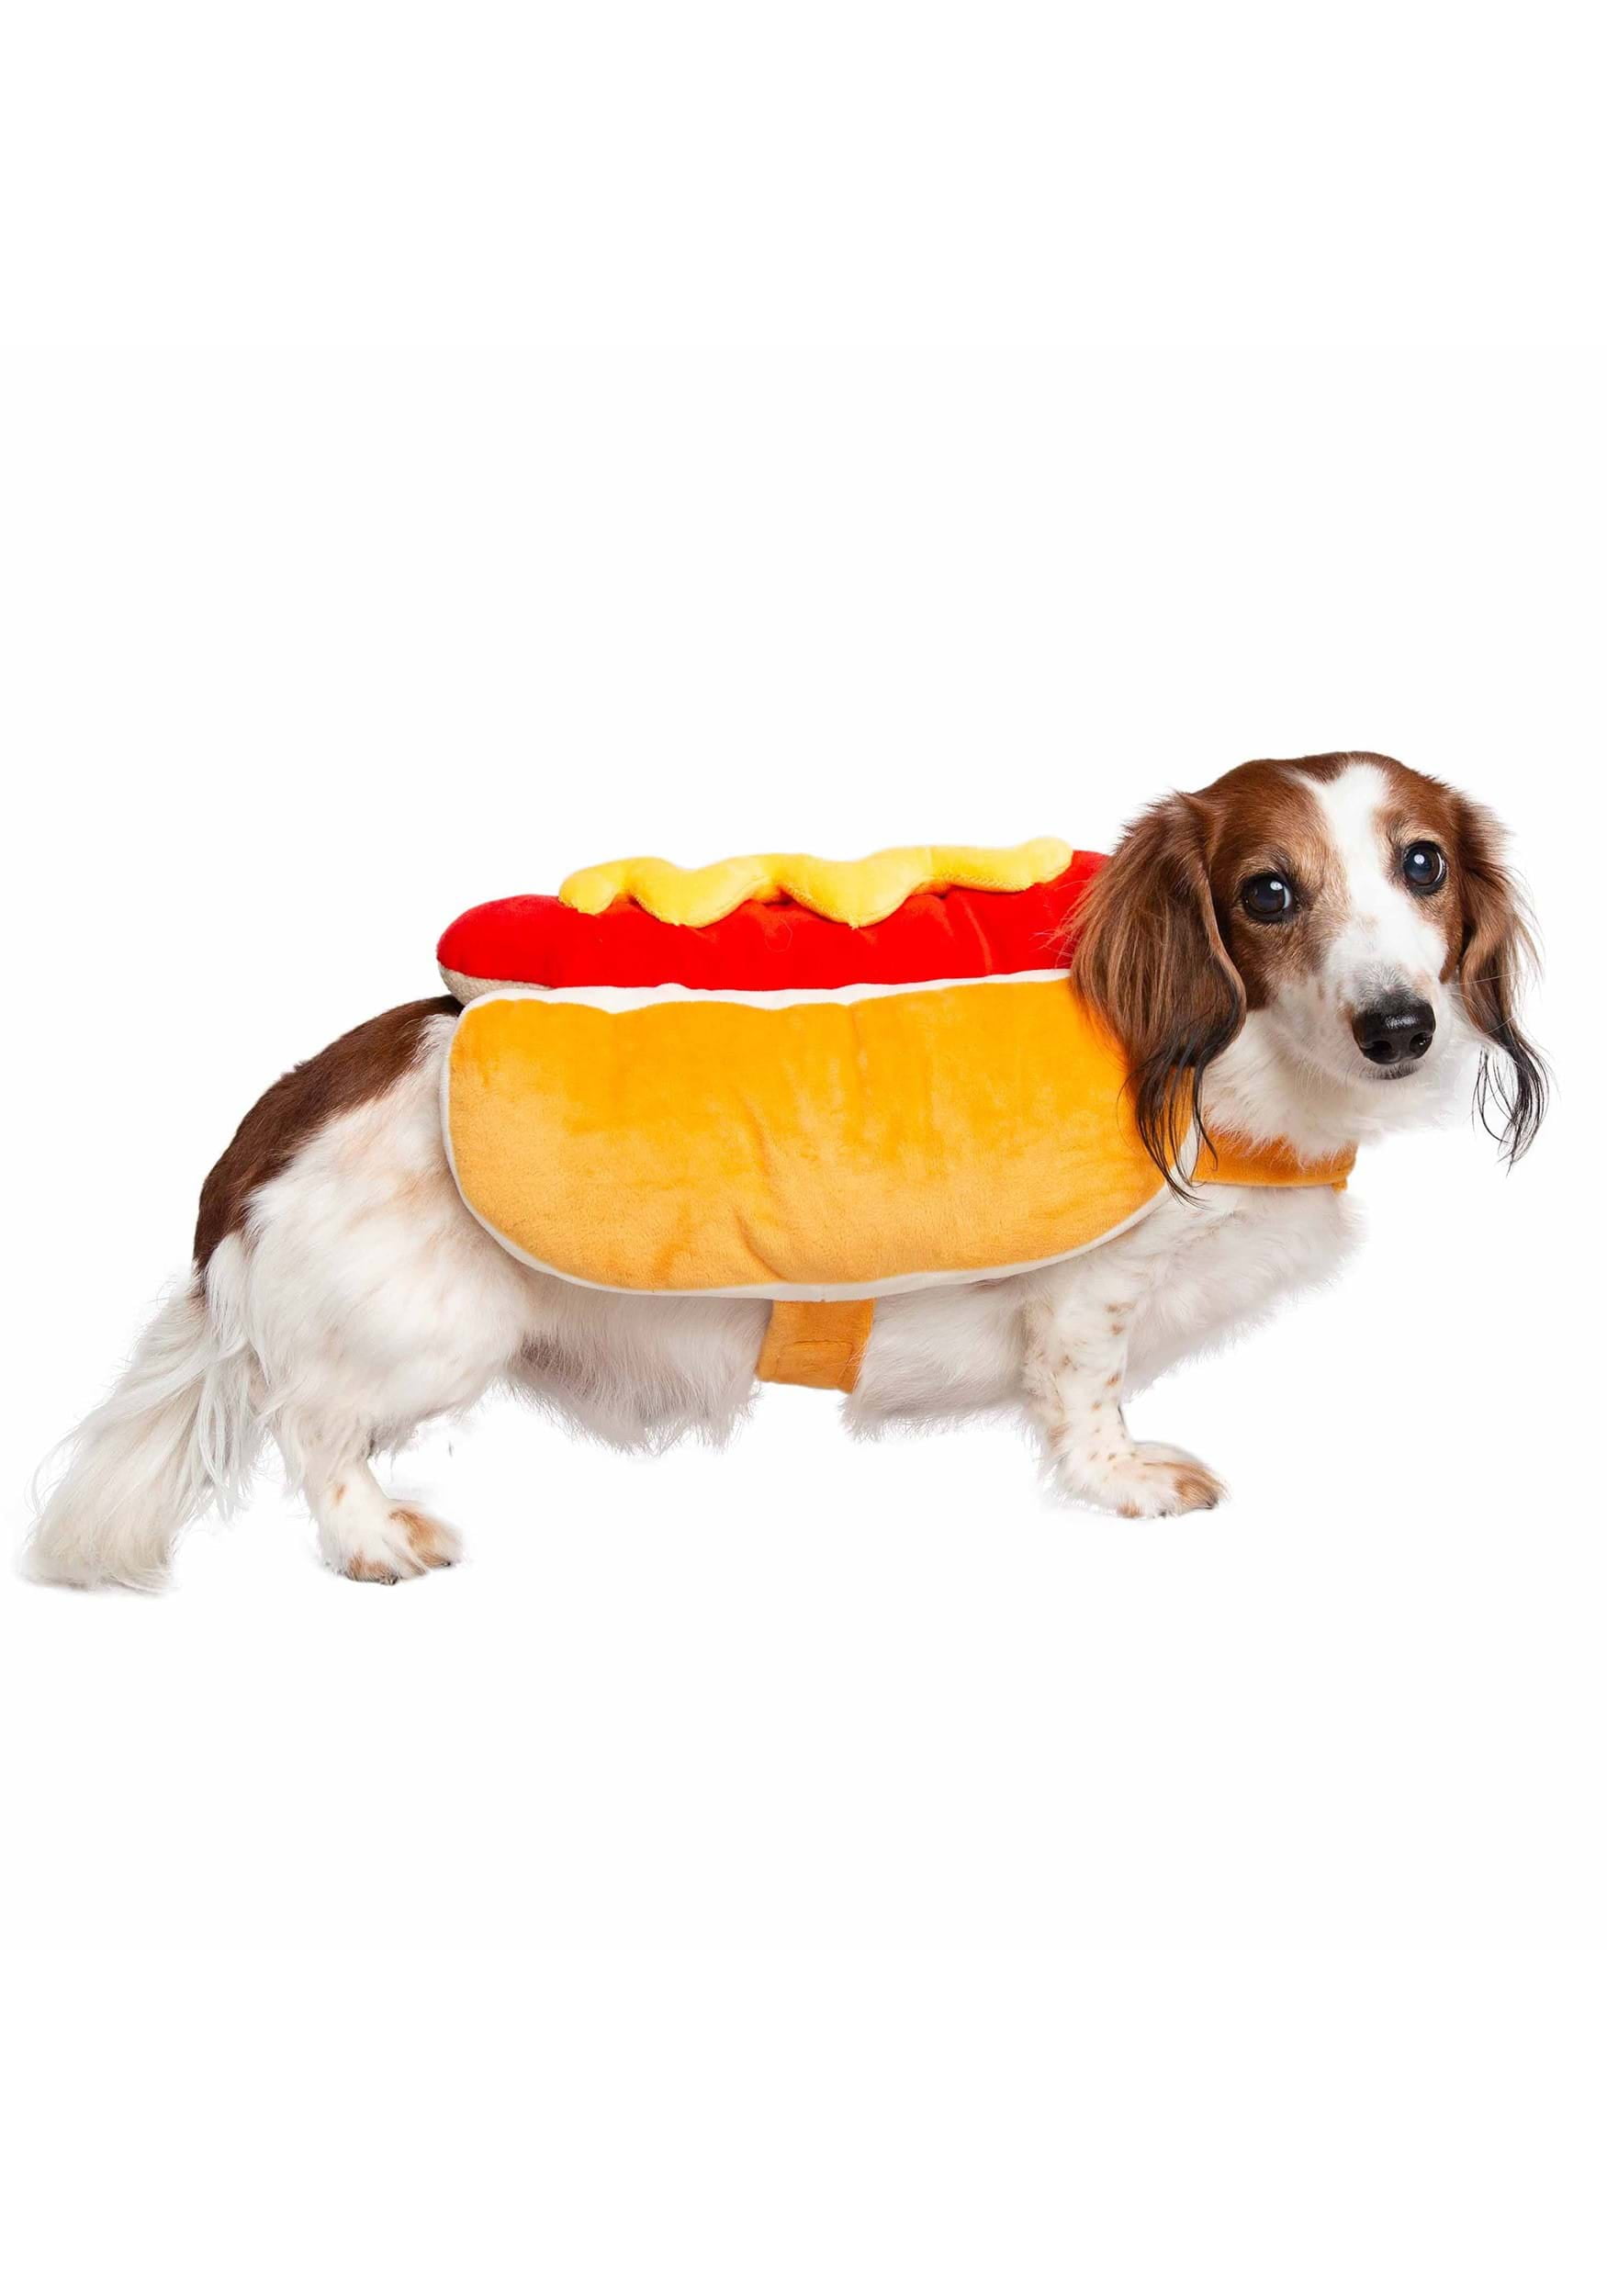 Pet Hot Dog Design Costume, Pet Costume Funny Dog Cosplay Outfits for  Halloween Day (Medium)